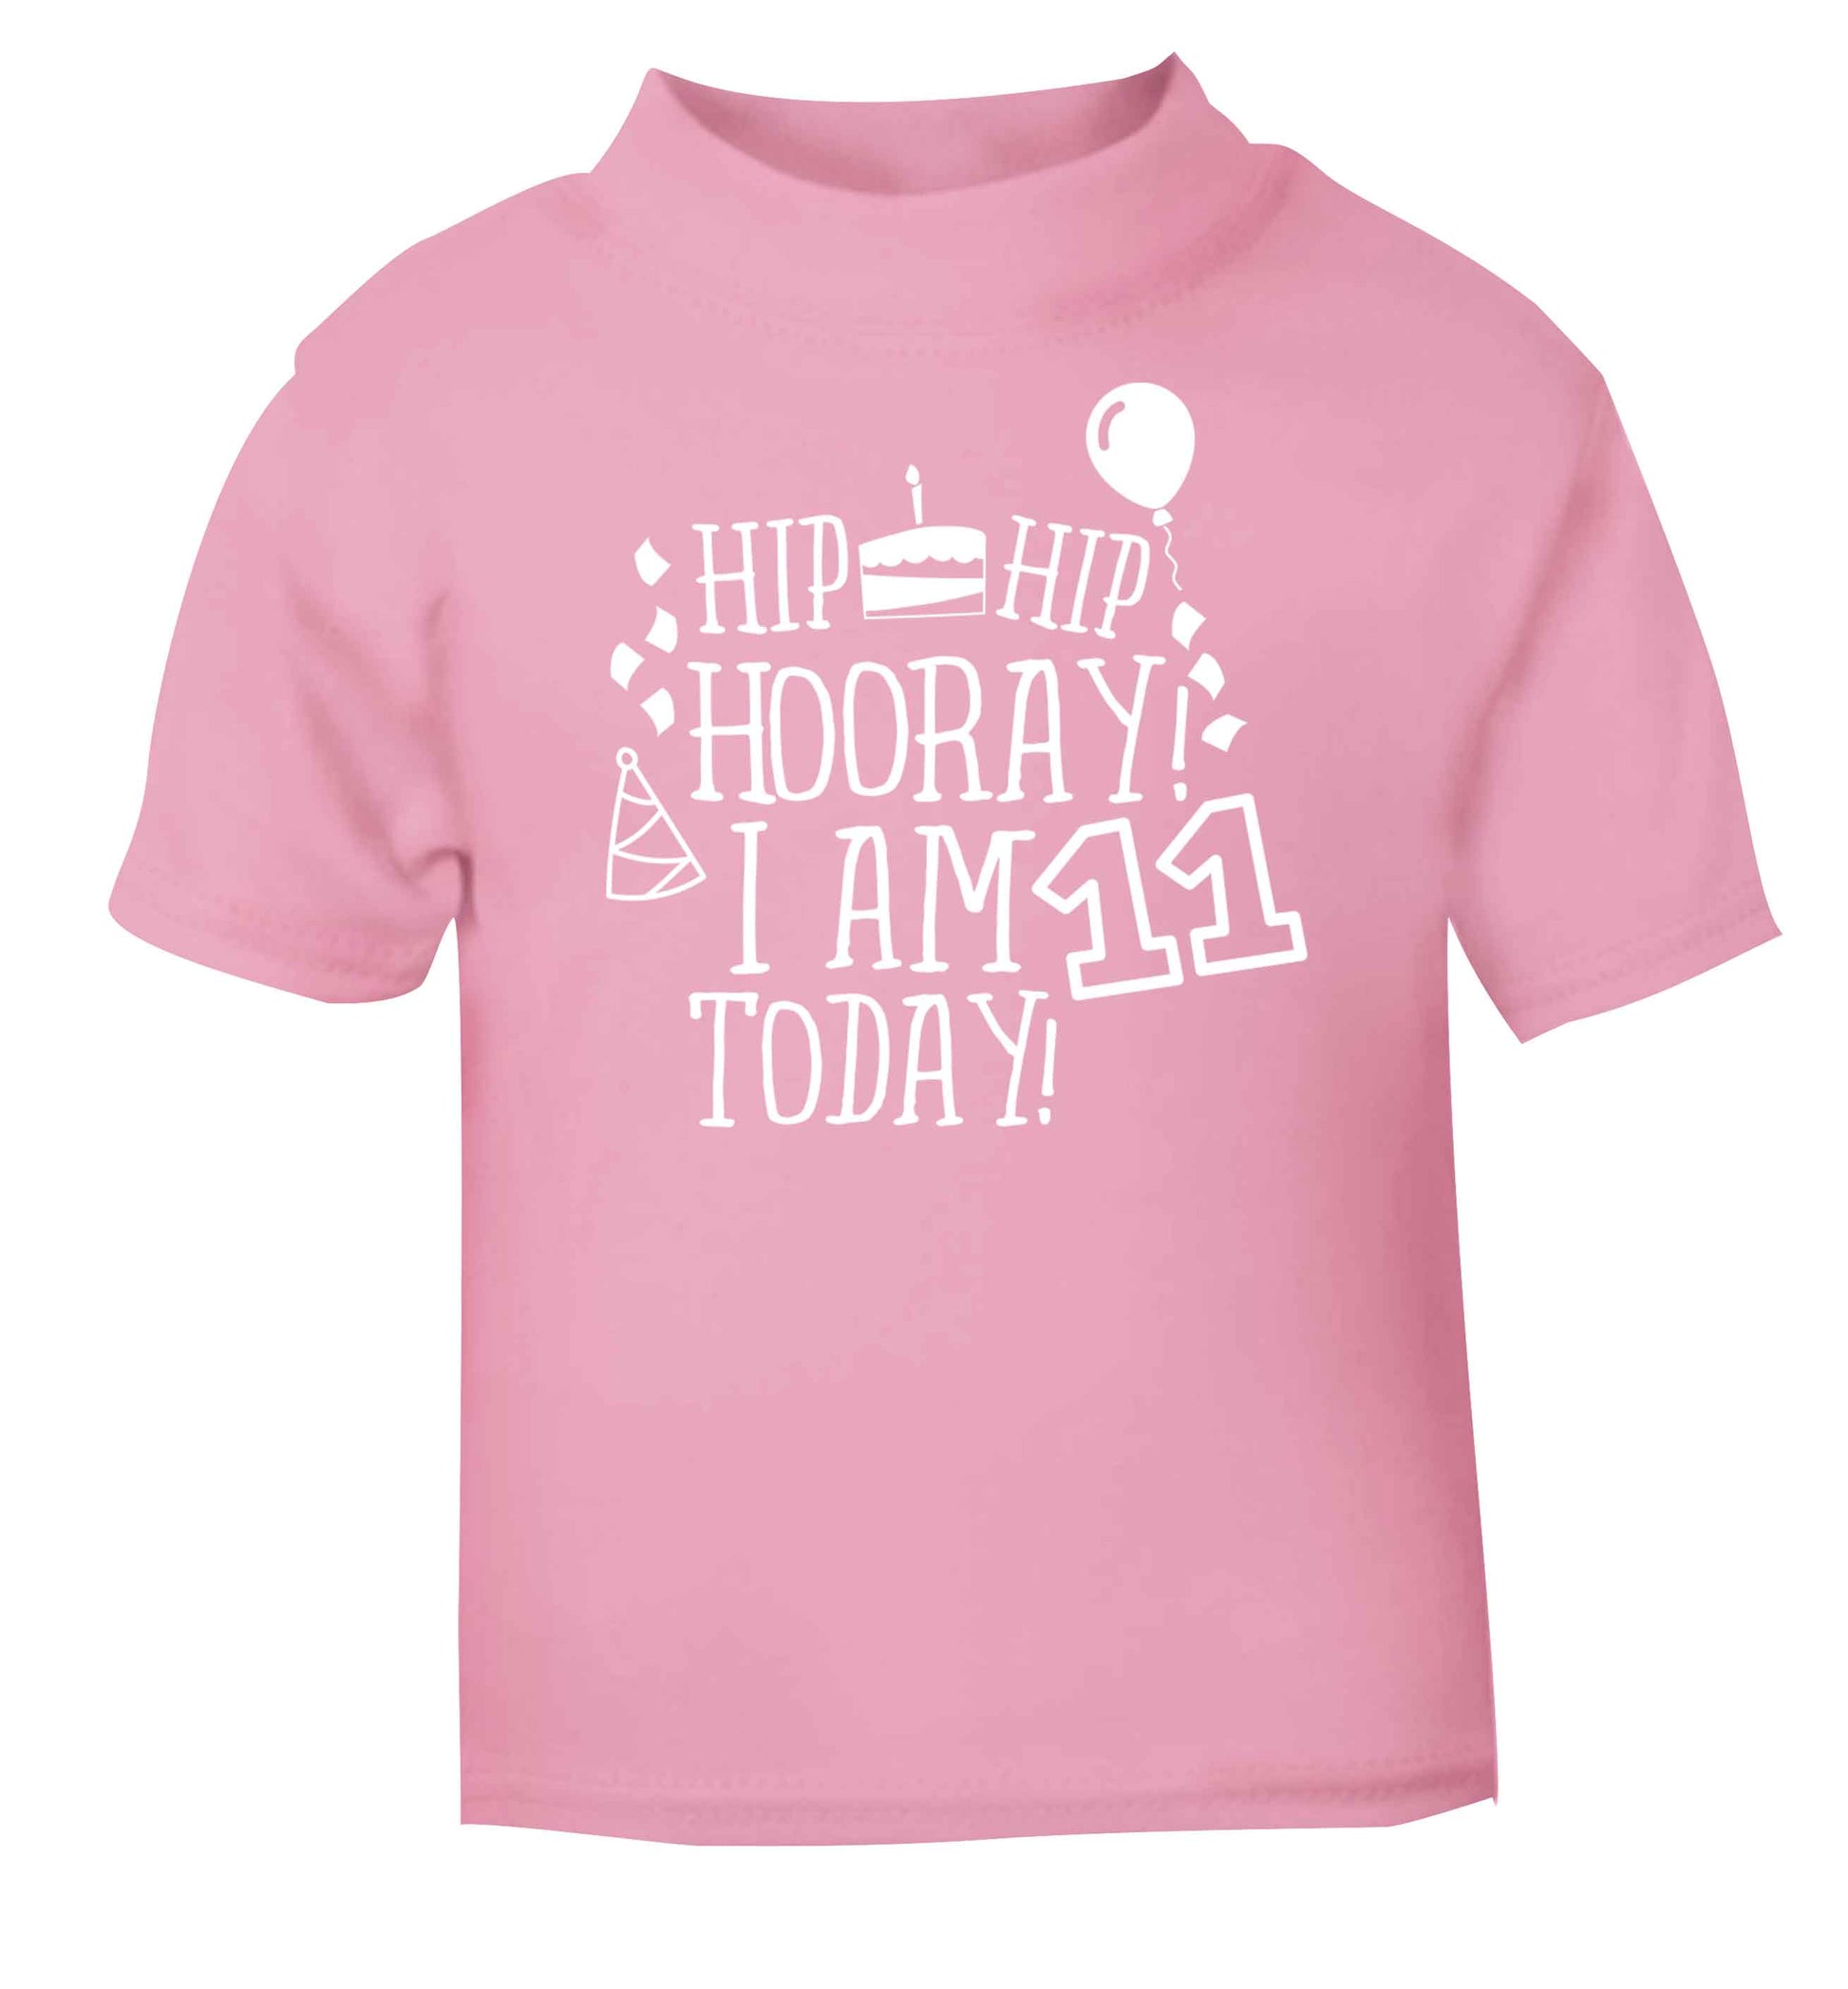 Hip hip hooray I am eleven today! light pink baby toddler Tshirt 2 Years